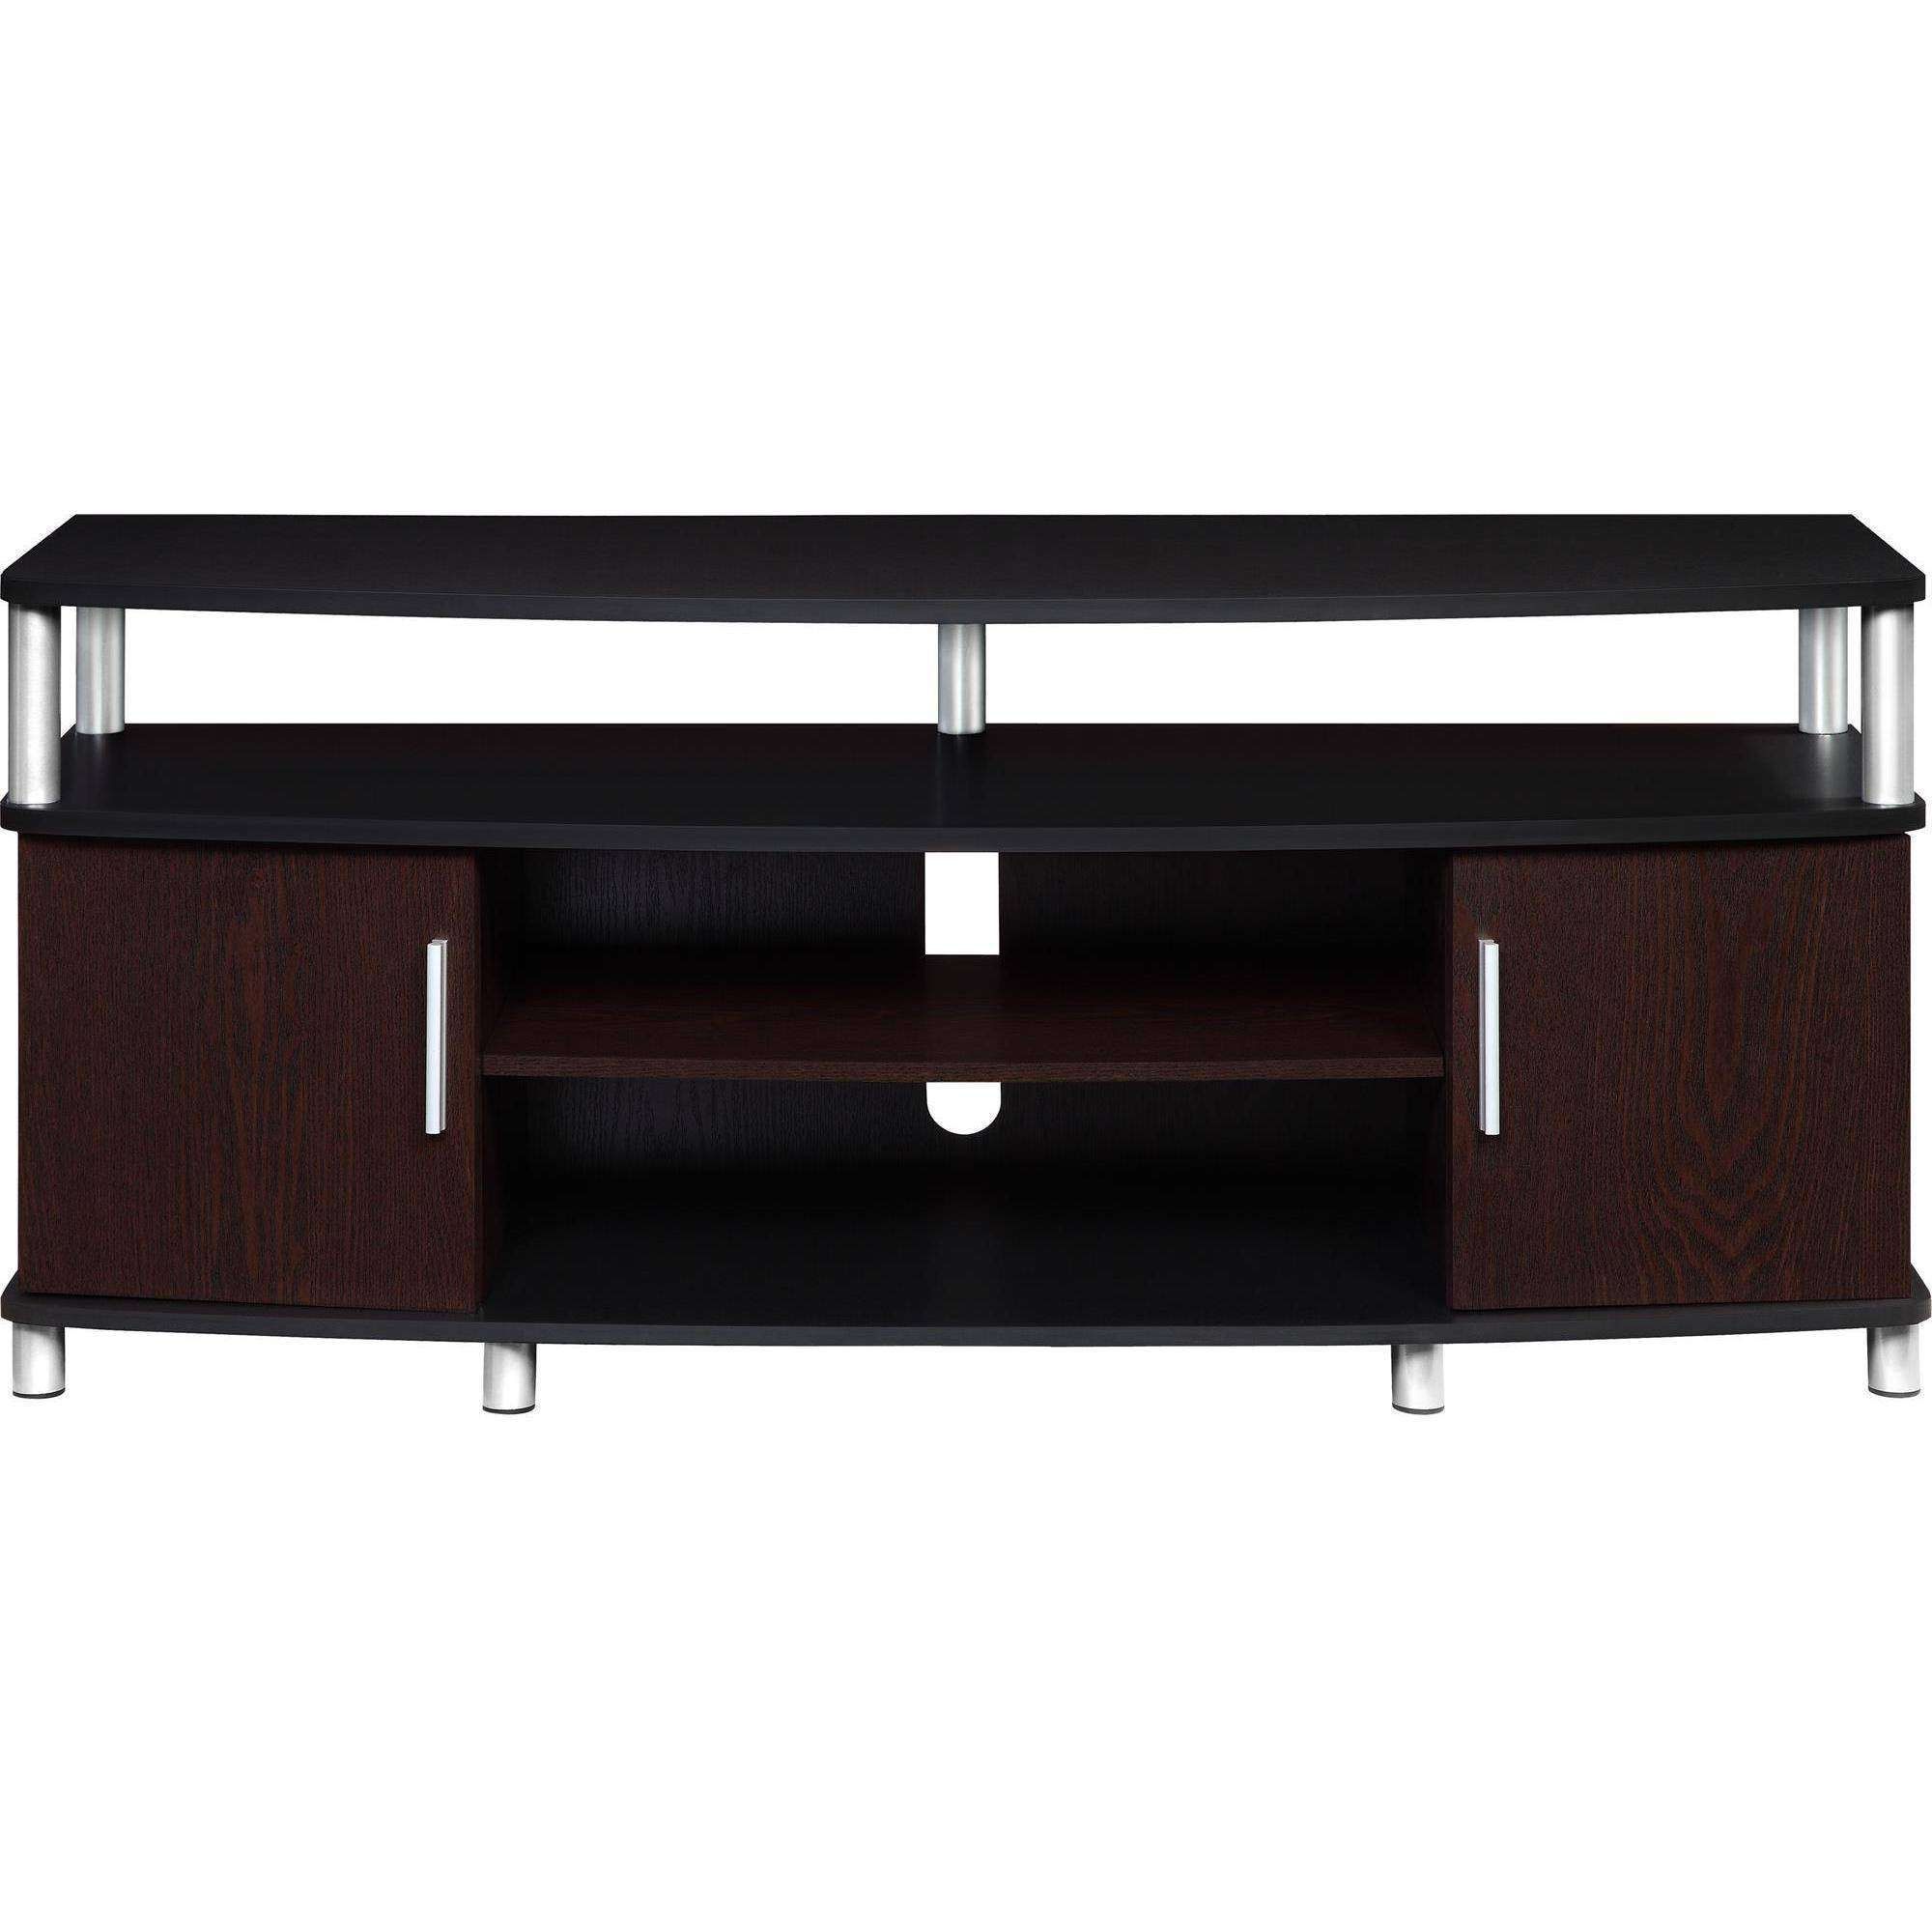 Tvnds For Inch Furniture Buynd Online Cheap Slimline Dark Wood Pertaining To Slimline Tv Cabinets (View 4 of 20)